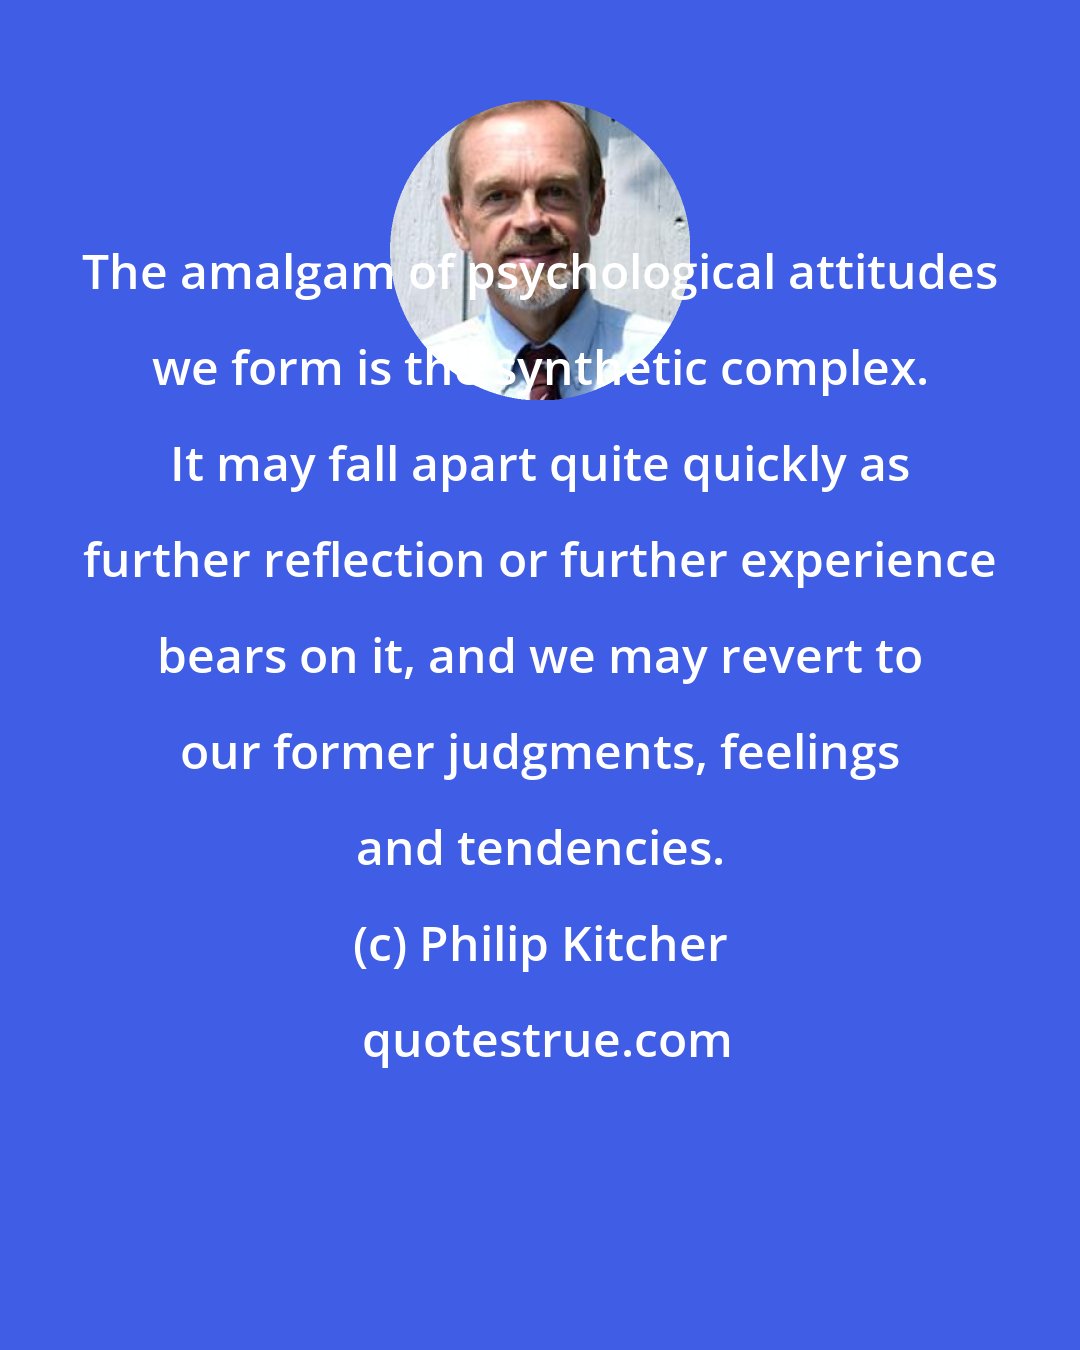 Philip Kitcher: The amalgam of psychological attitudes we form is the synthetic complex. It may fall apart quite quickly as further reflection or further experience bears on it, and we may revert to our former judgments, feelings and tendencies.